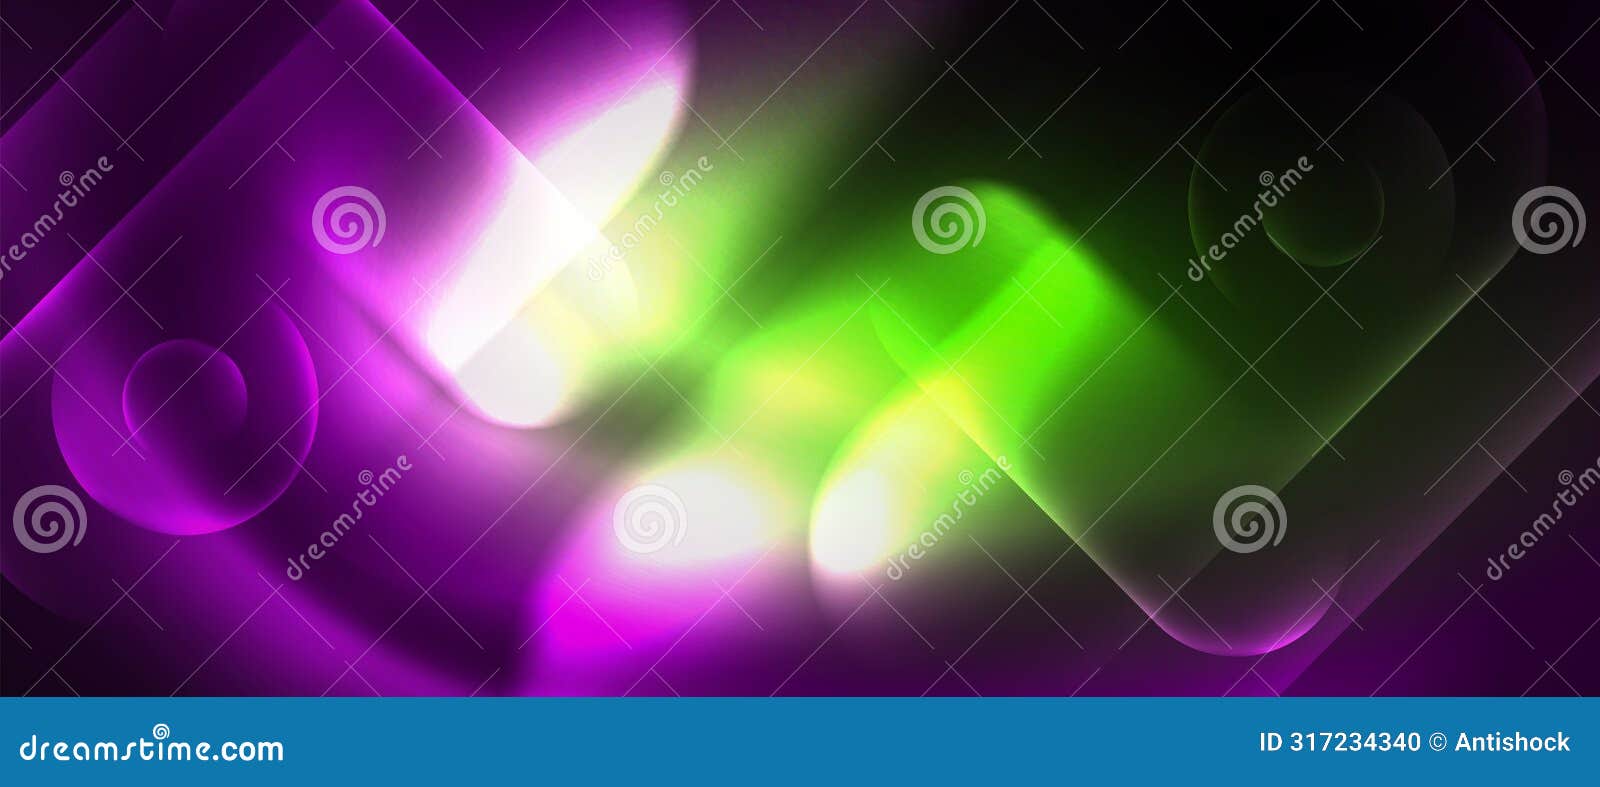 shiny color neon glowing .   for wallpaper, banner, background, card, book , landing